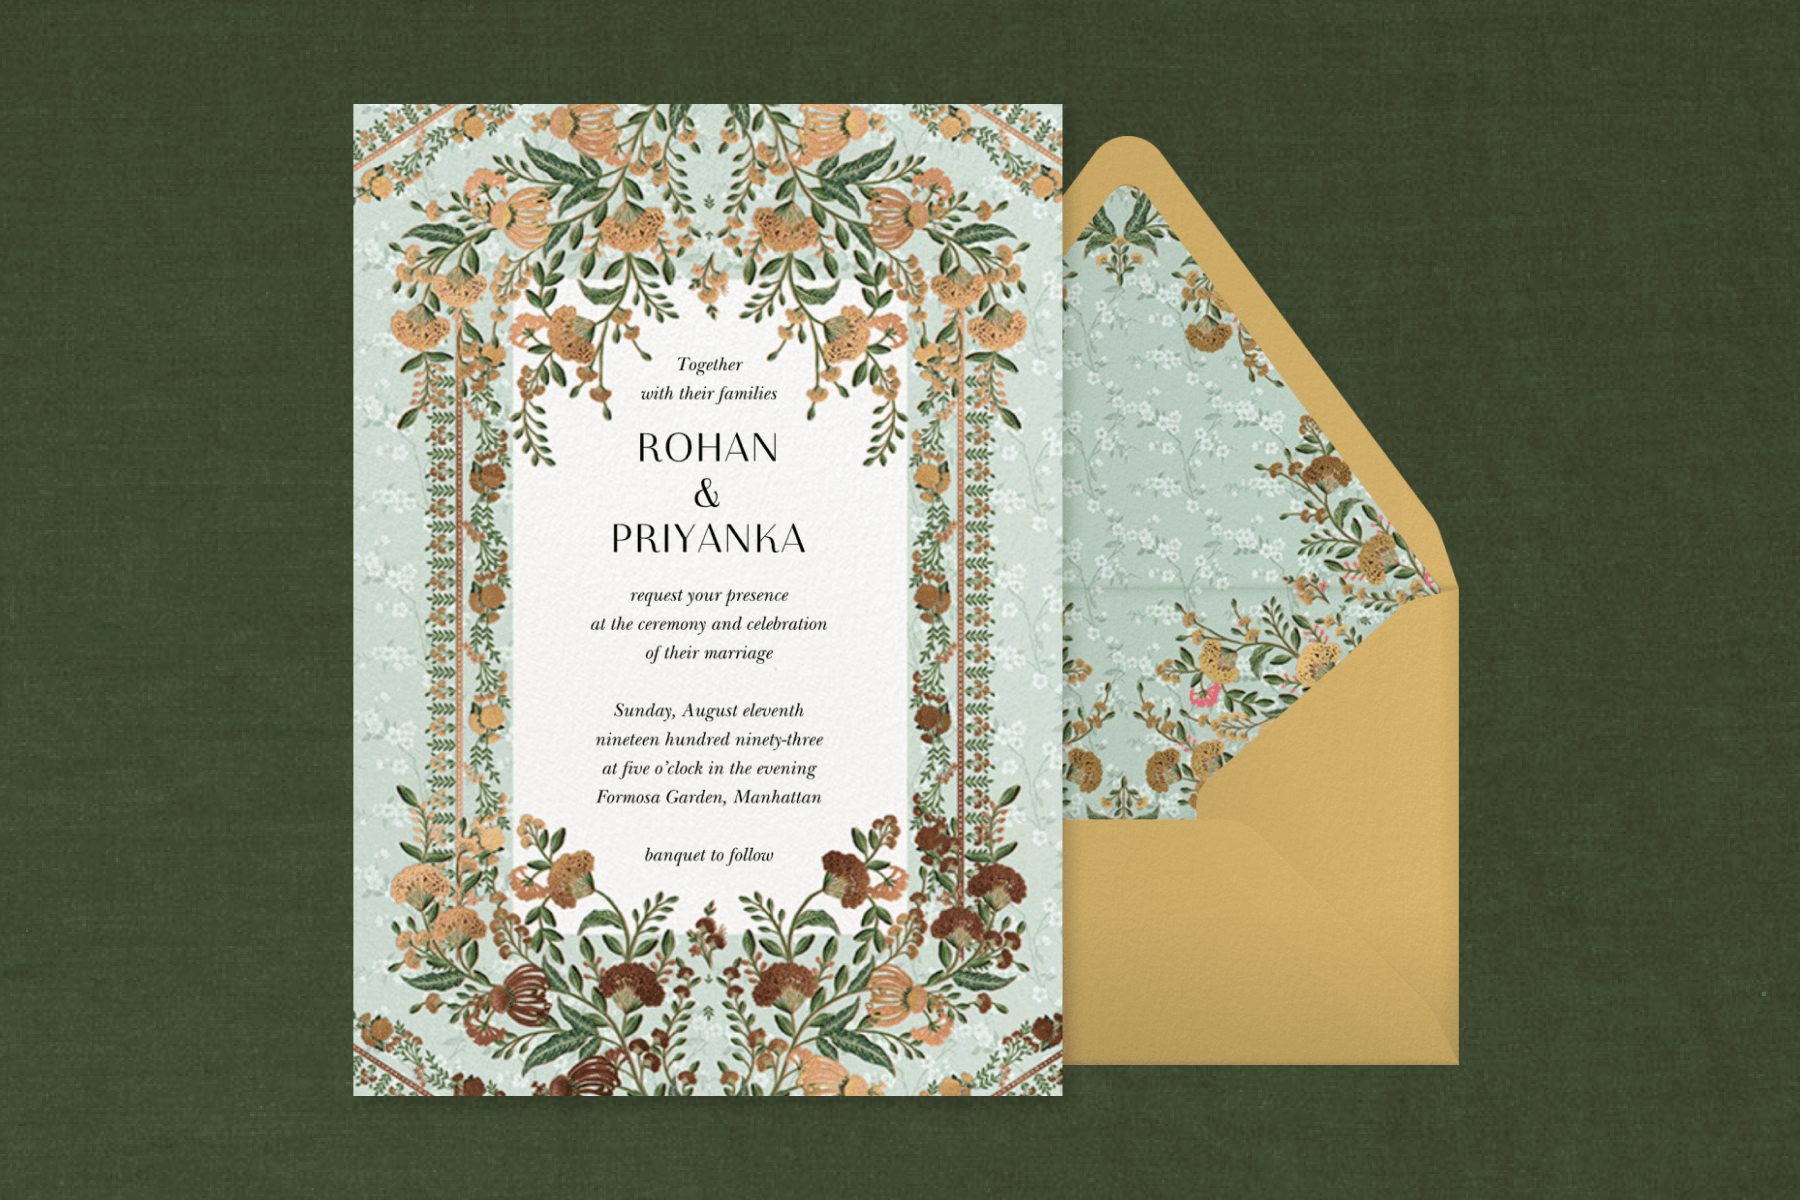 A seafoam and gold invitation ornately decorated with flowers and a detailed border, paired with a gold envelope and matching liner.